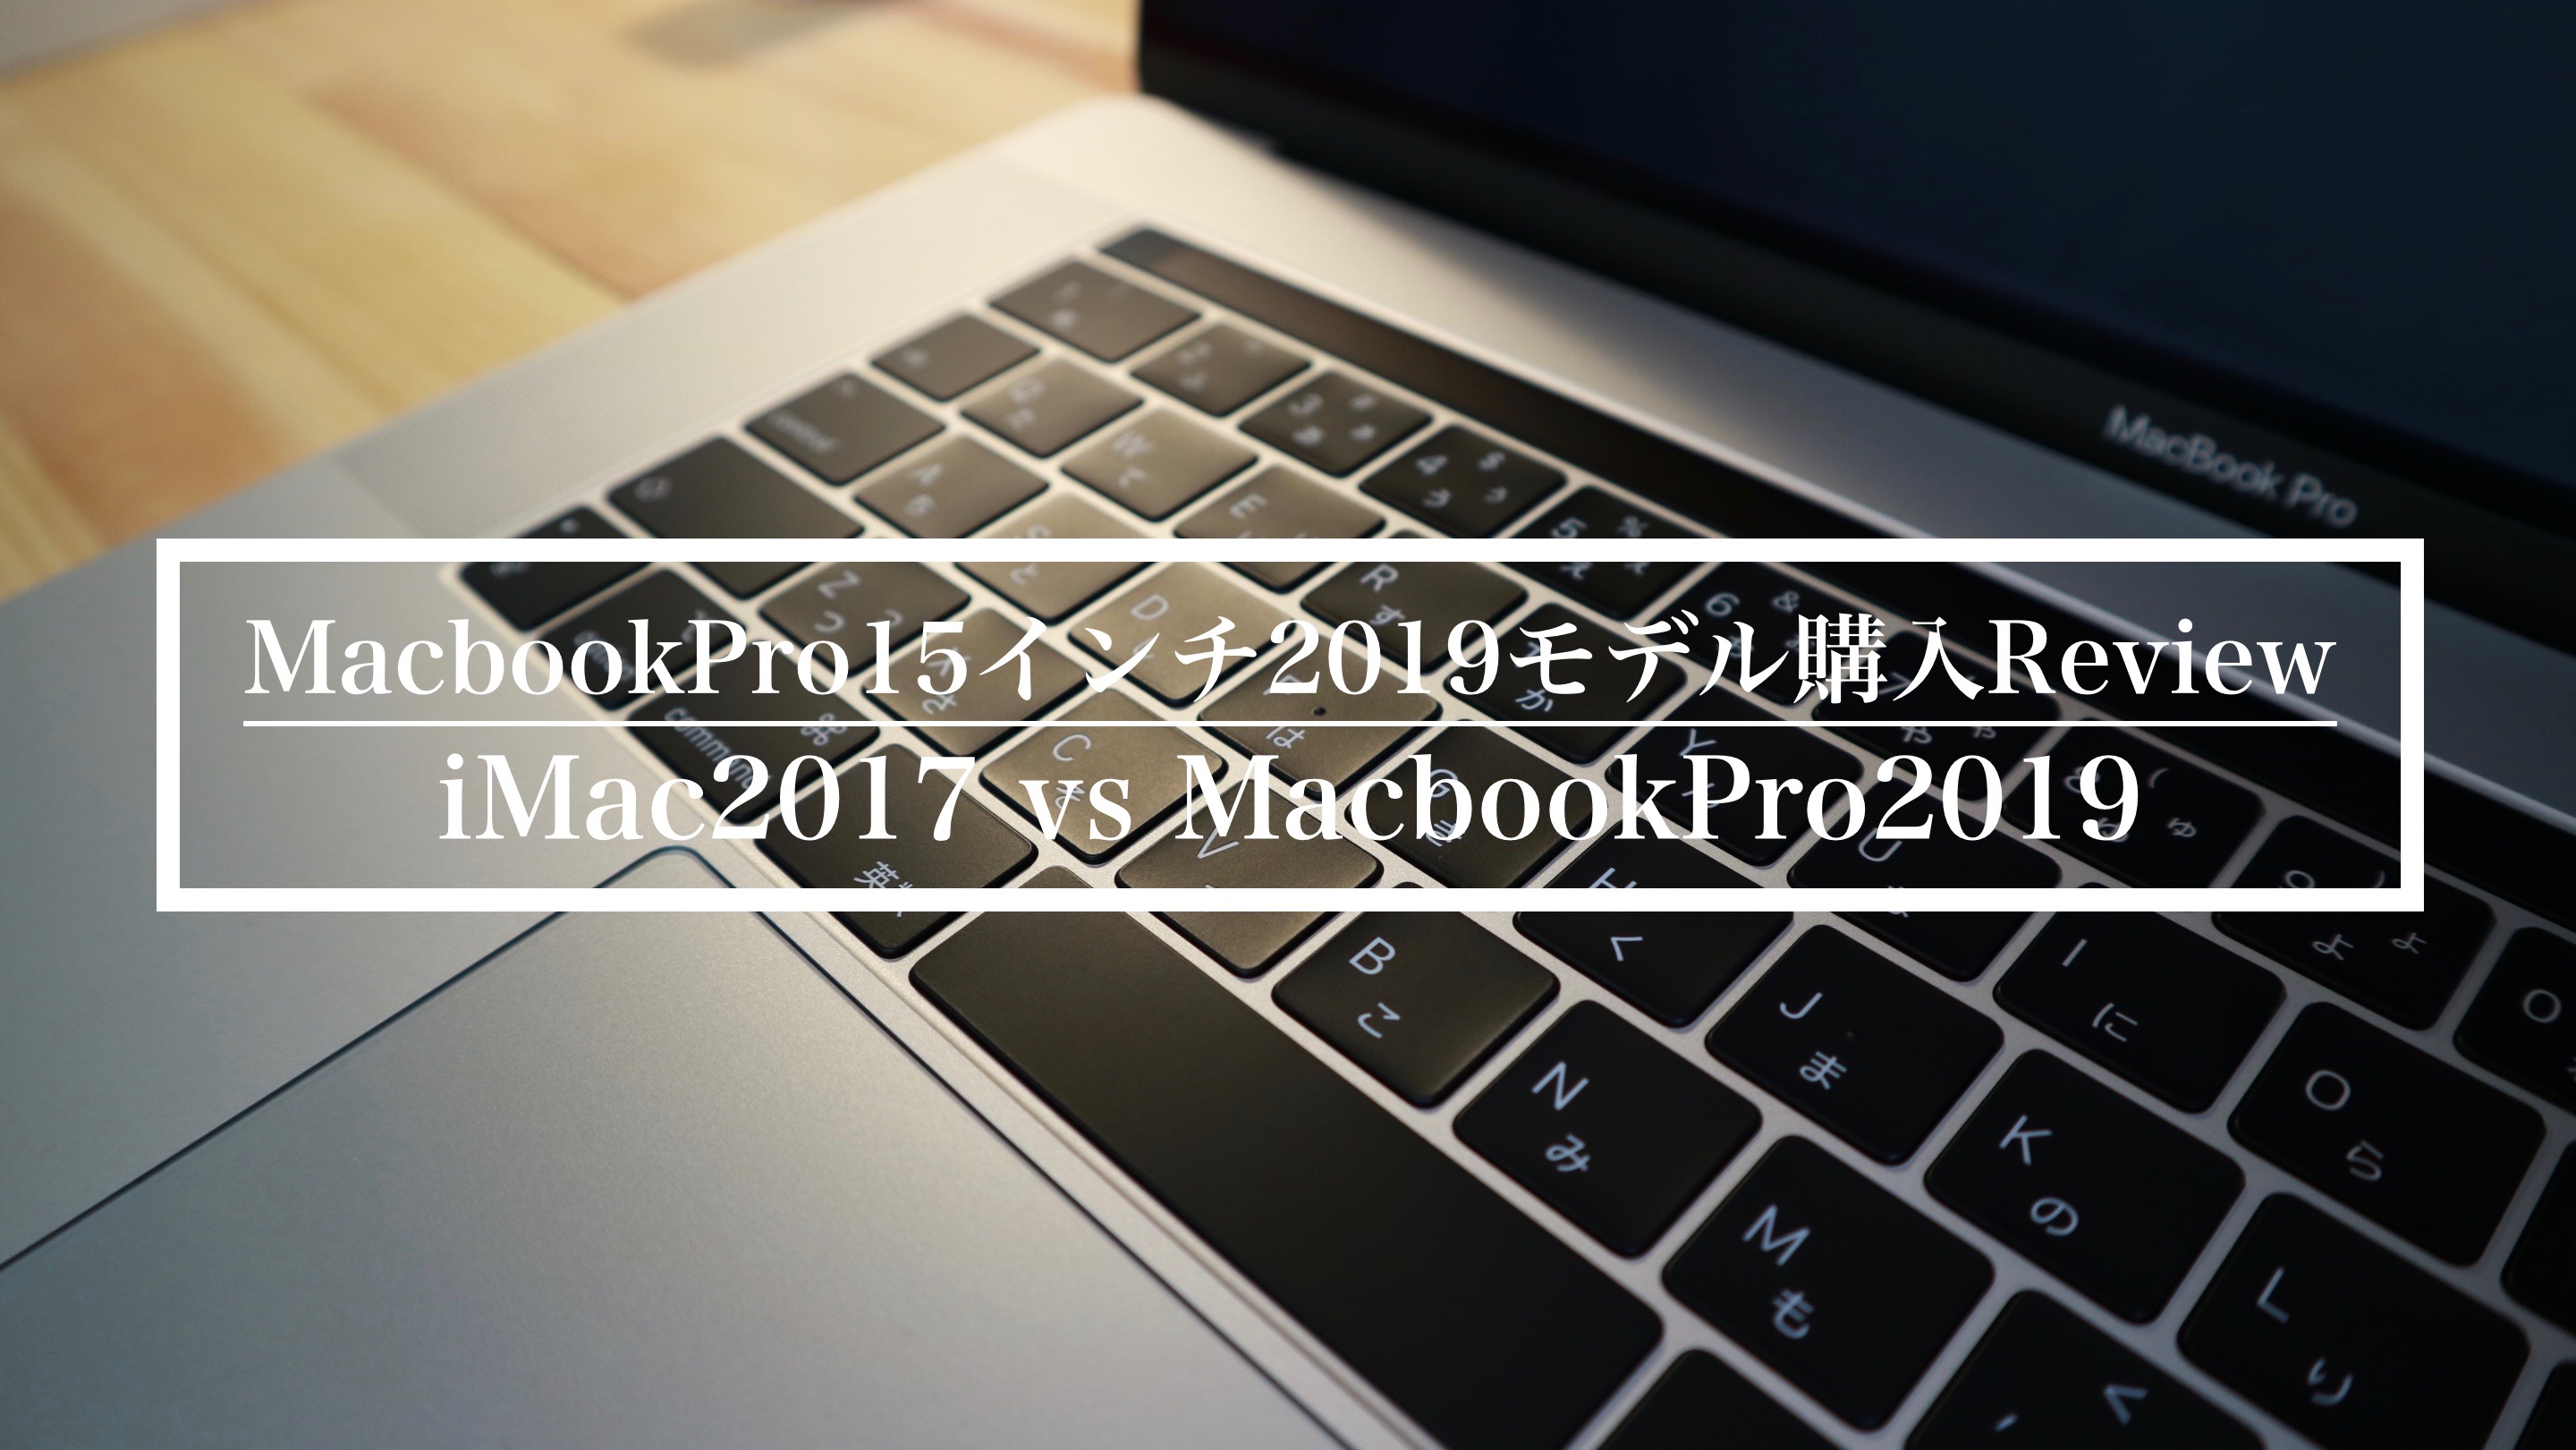 MacbookPro15インチ2019モデル購入Review - MouseChord.com